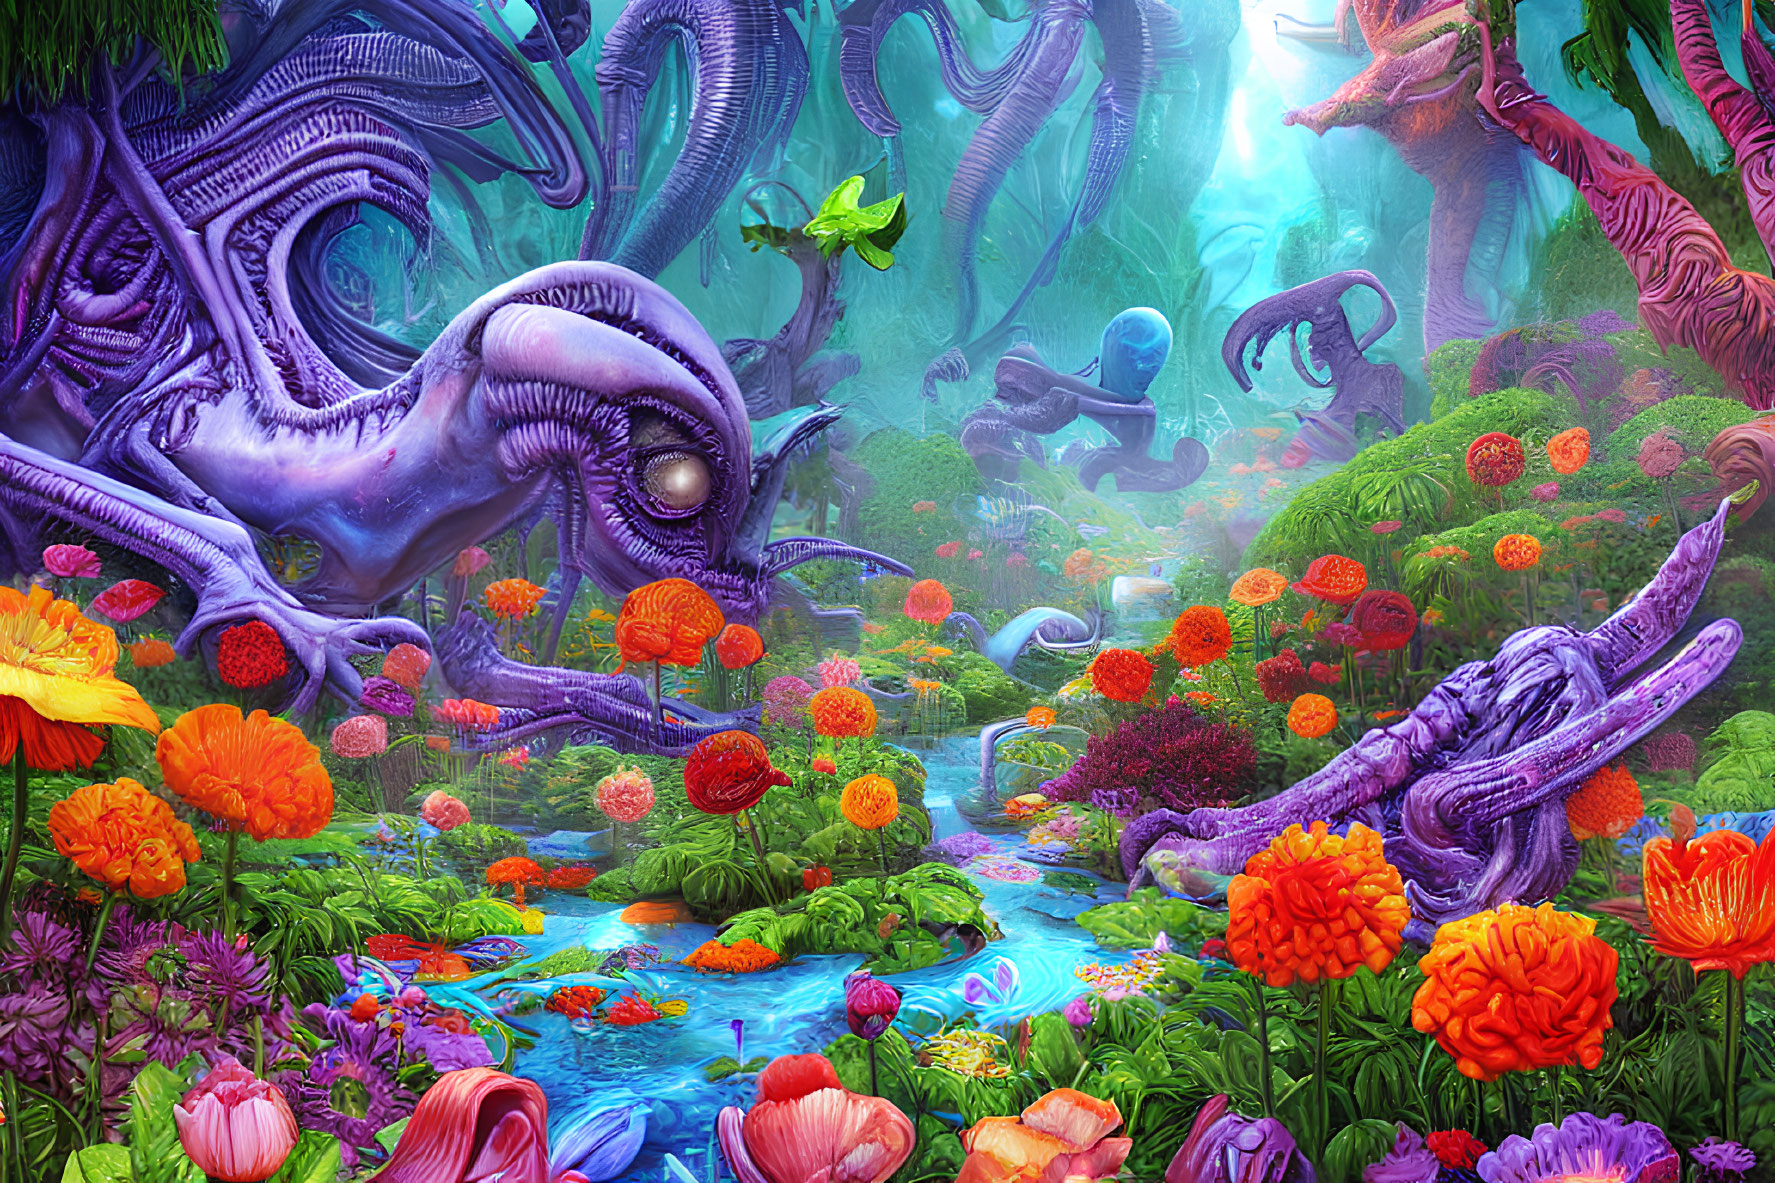 Colorful Underwater Scene with Fantastical Flora and Fauna